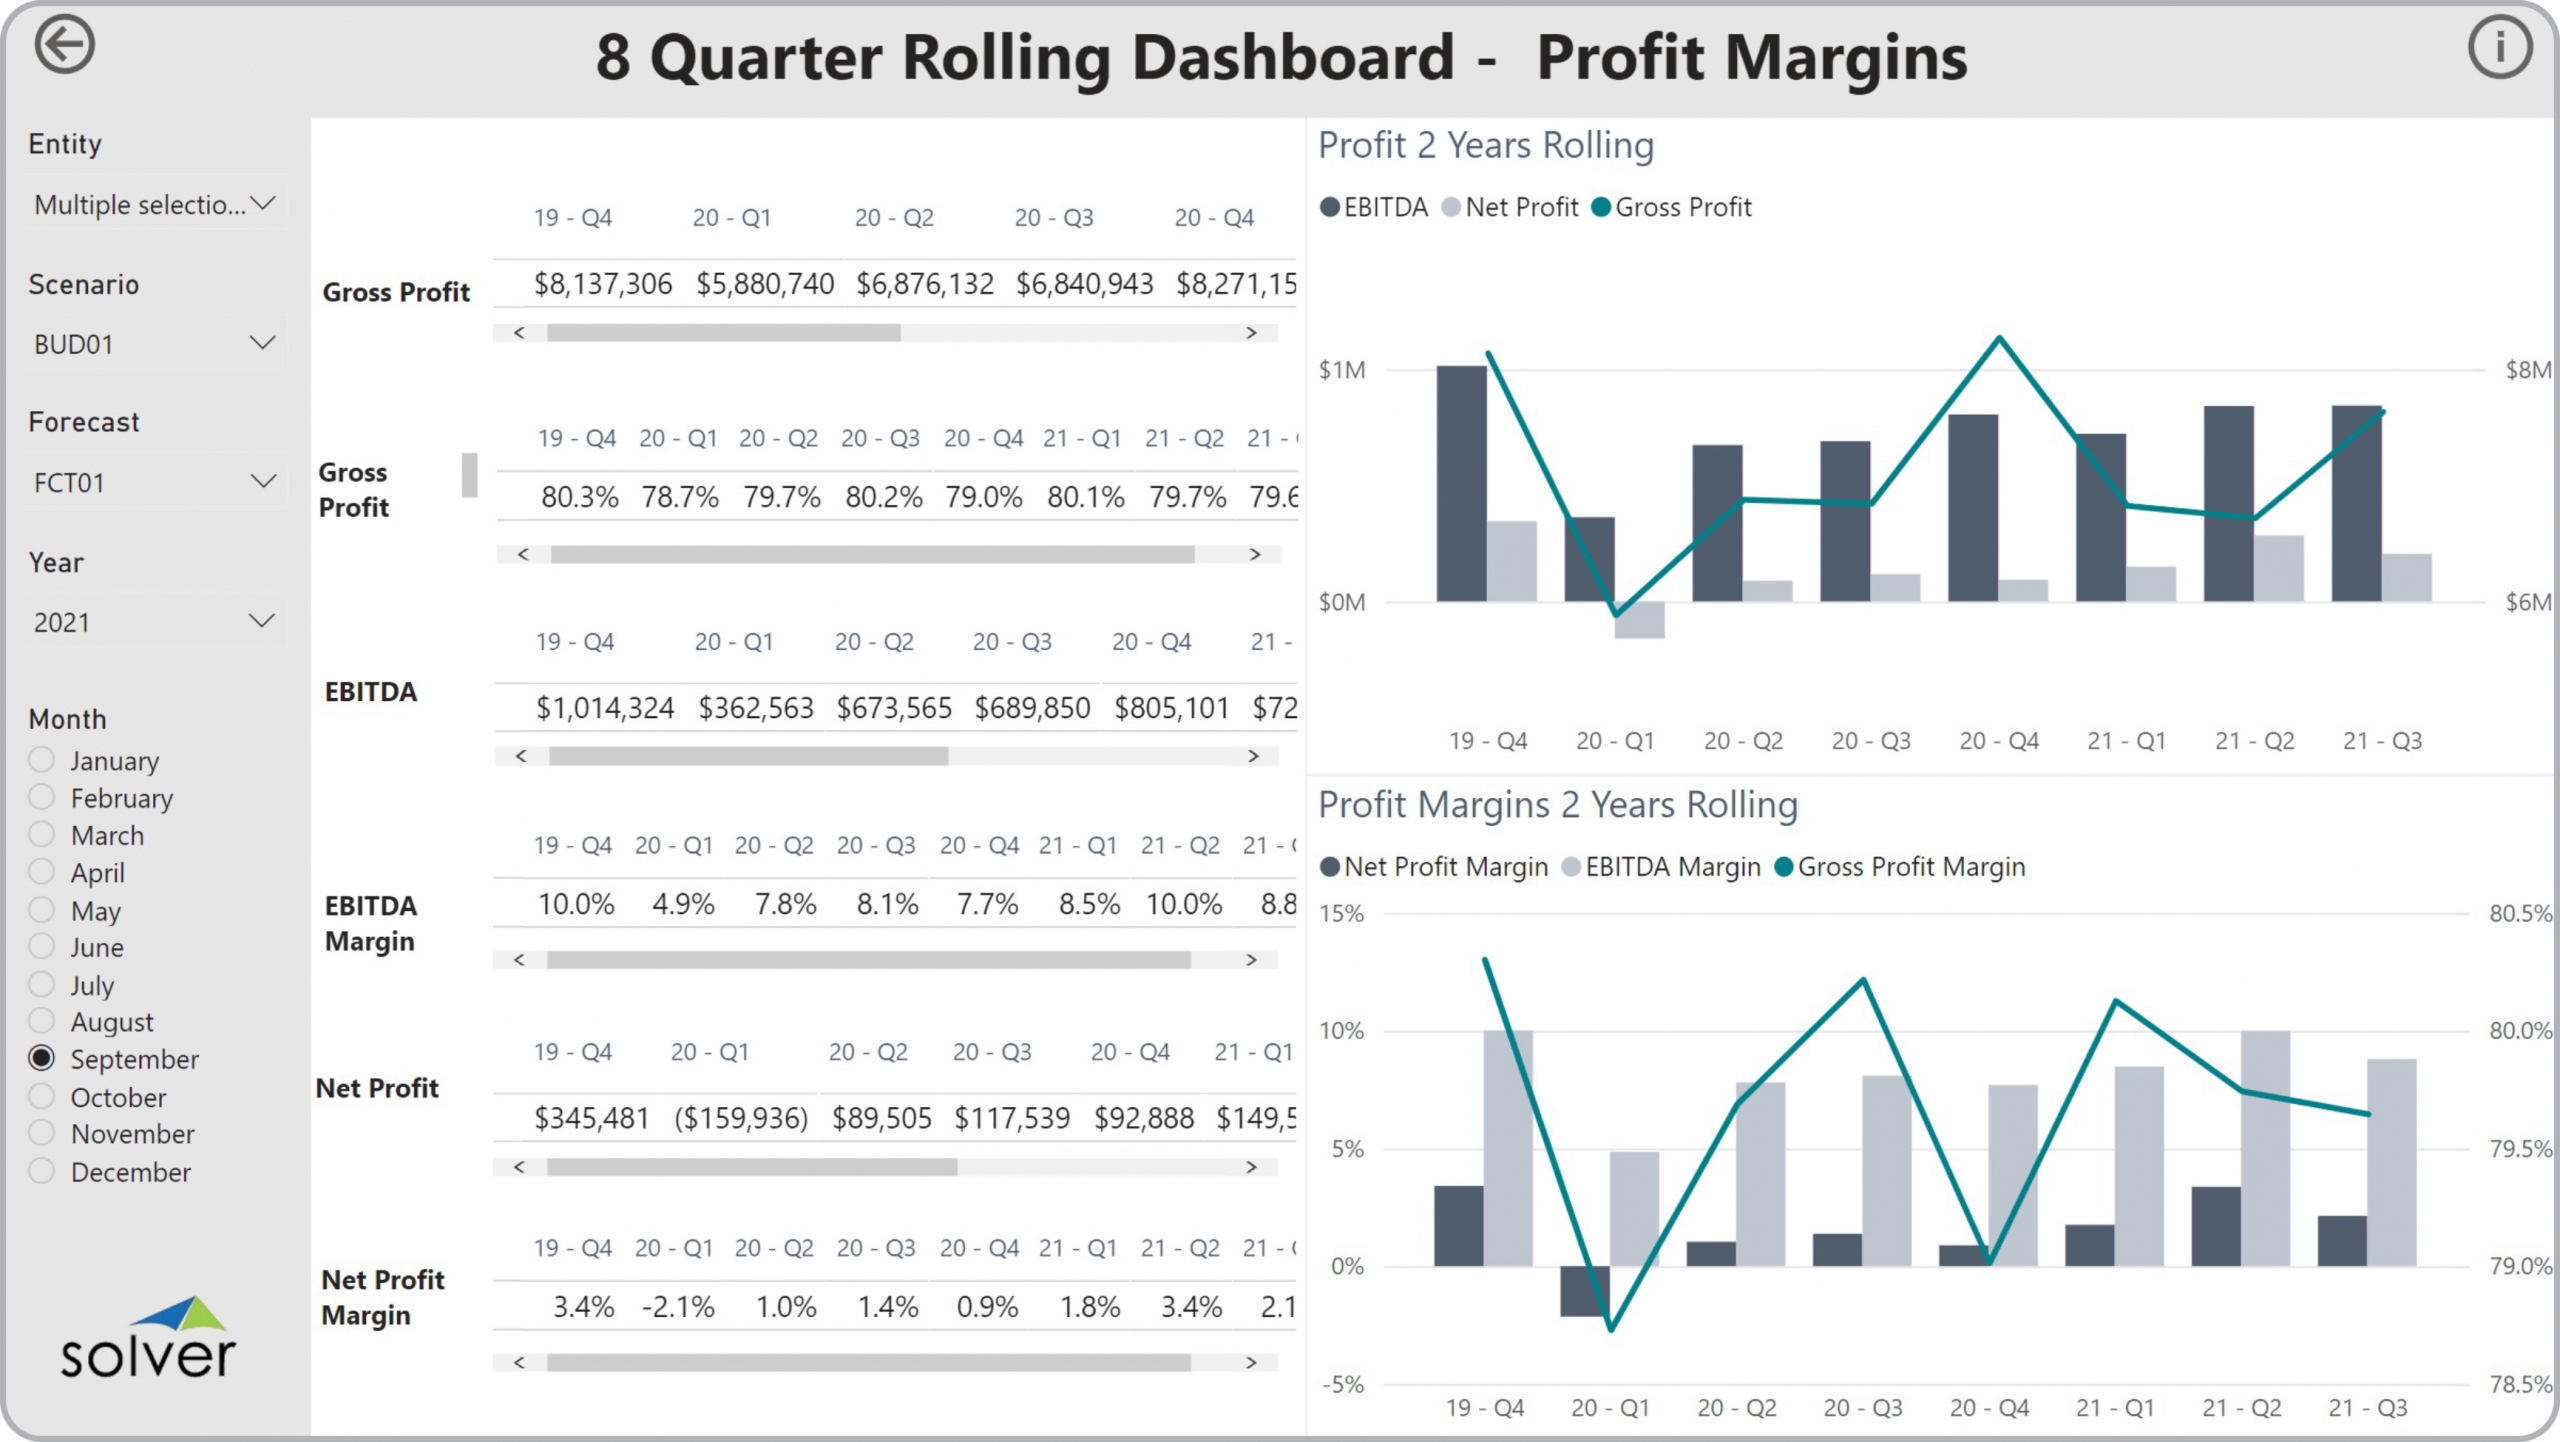 Example of an 8 Quarter Rolling Profit Margin Dashboard to Streamline the Monthly Reporting Process